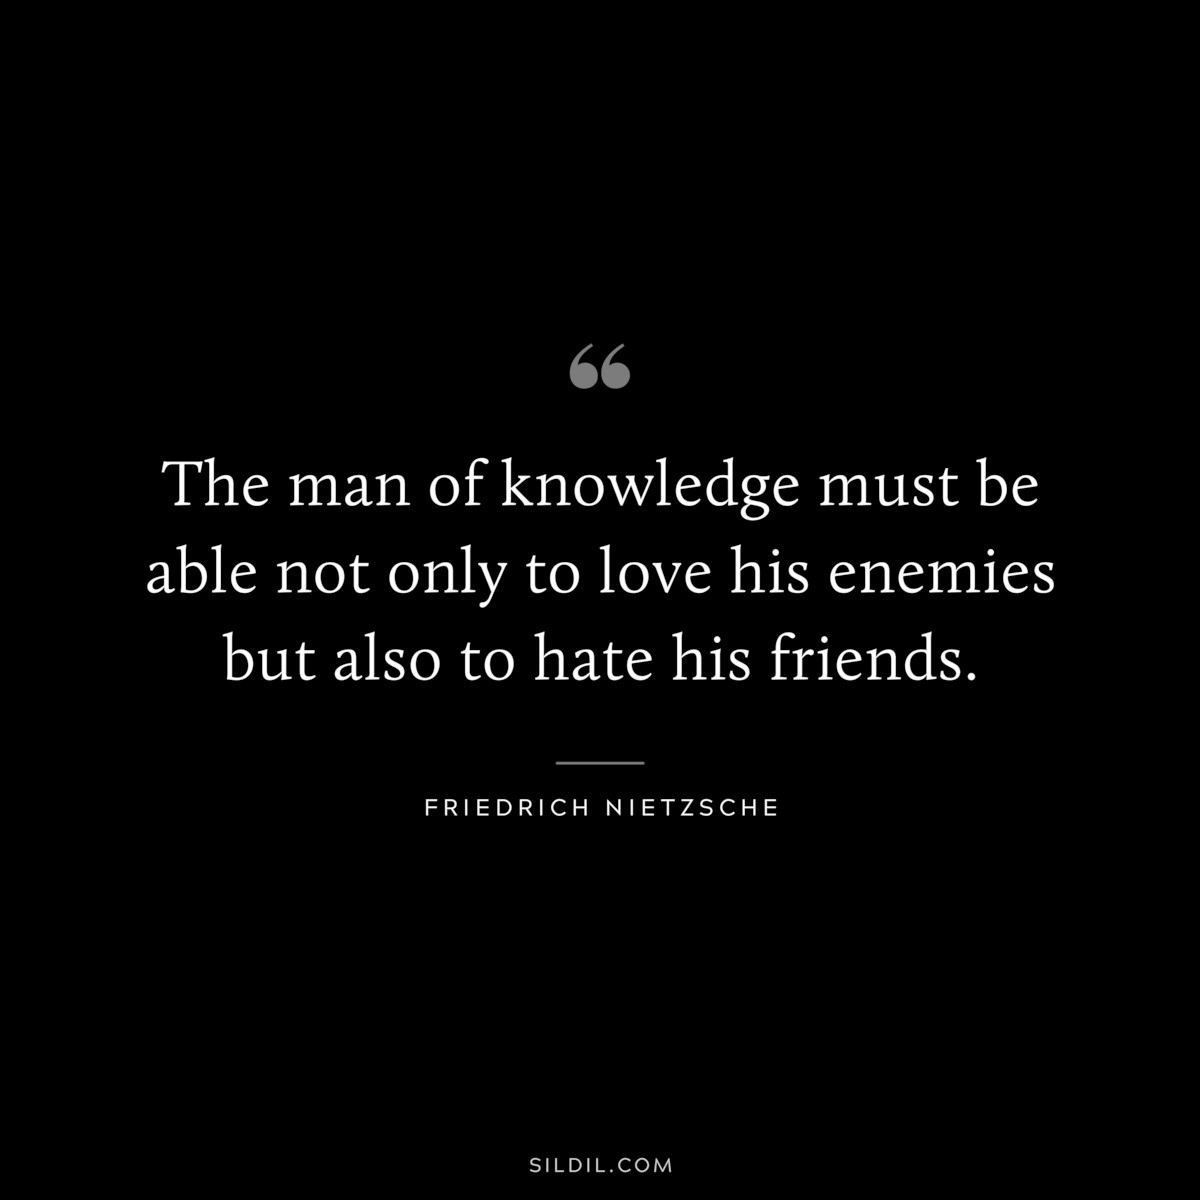 The man of knowledge must be able not only to love his enemies but also to hate his friends. ― Friedrich Nietzsche